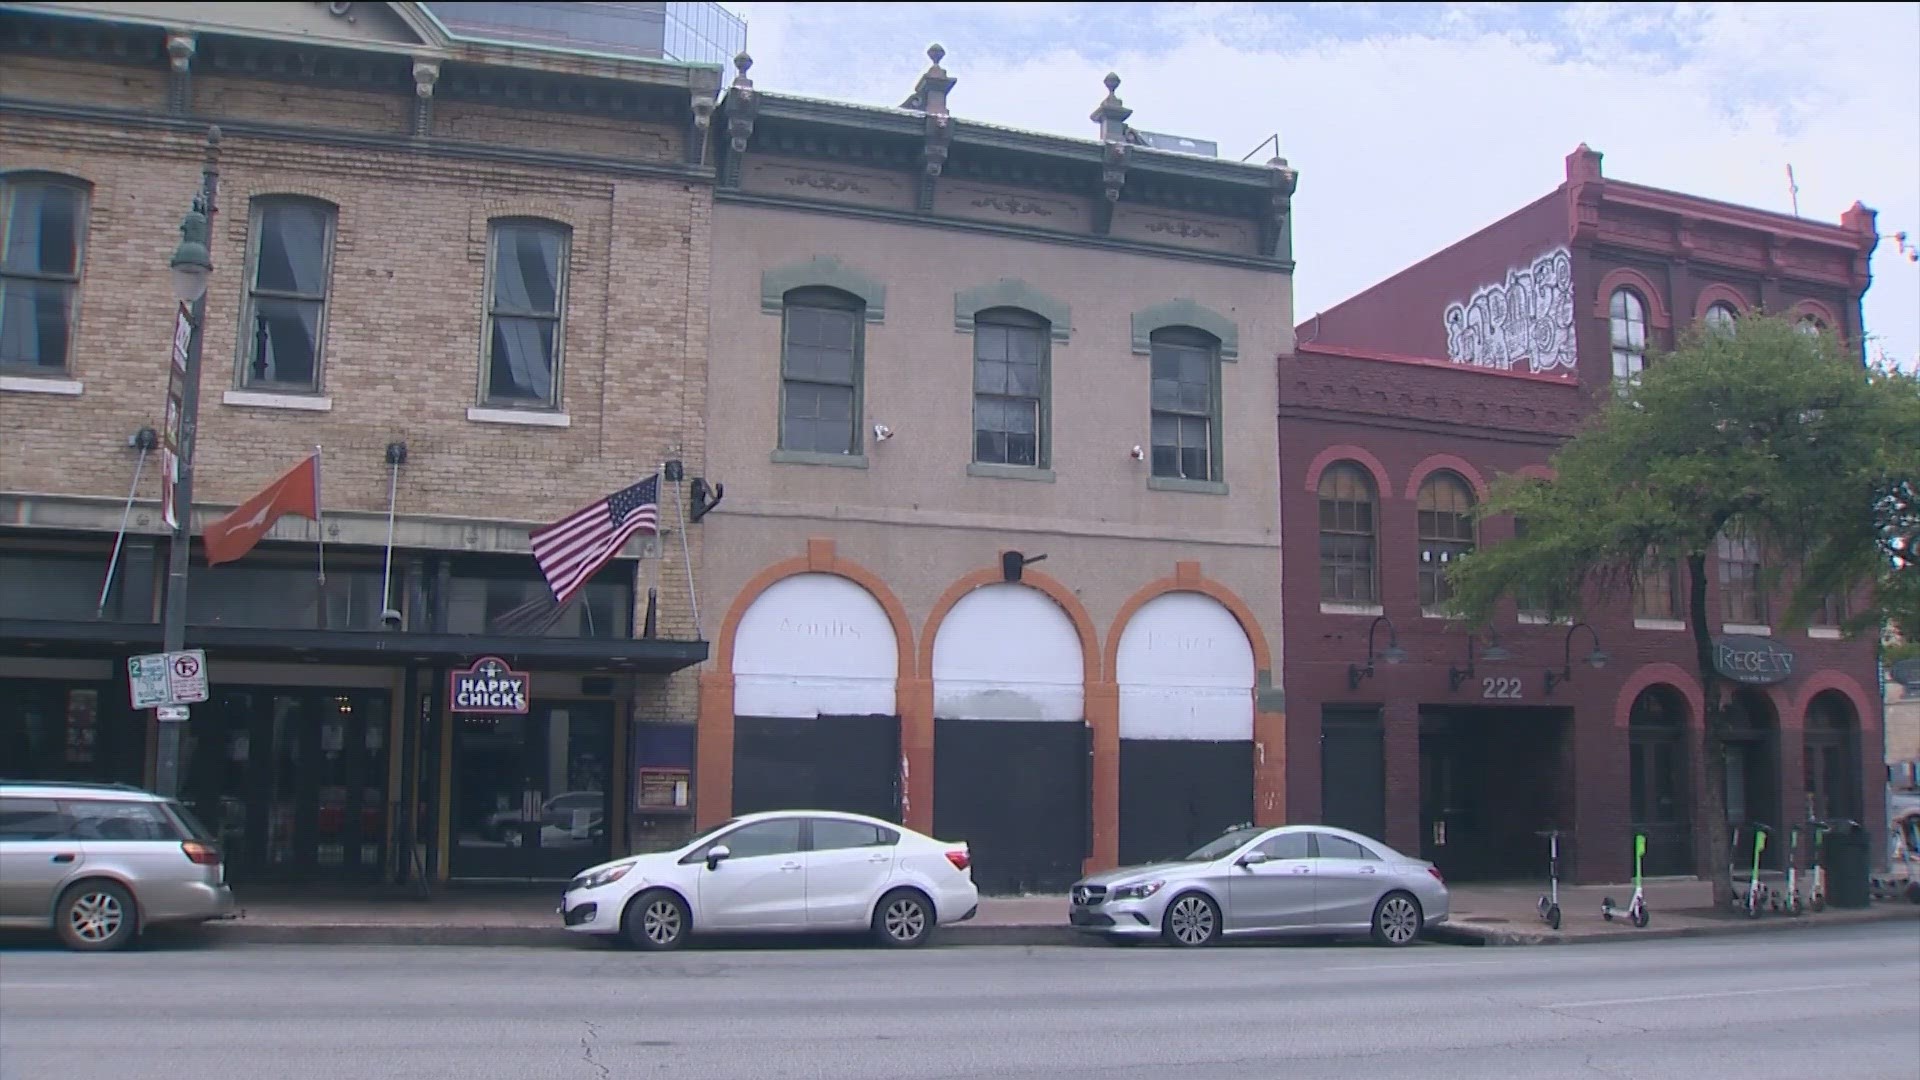 The Austin City Council has approved an increased building height in portions of the Sixth Street Historic District.